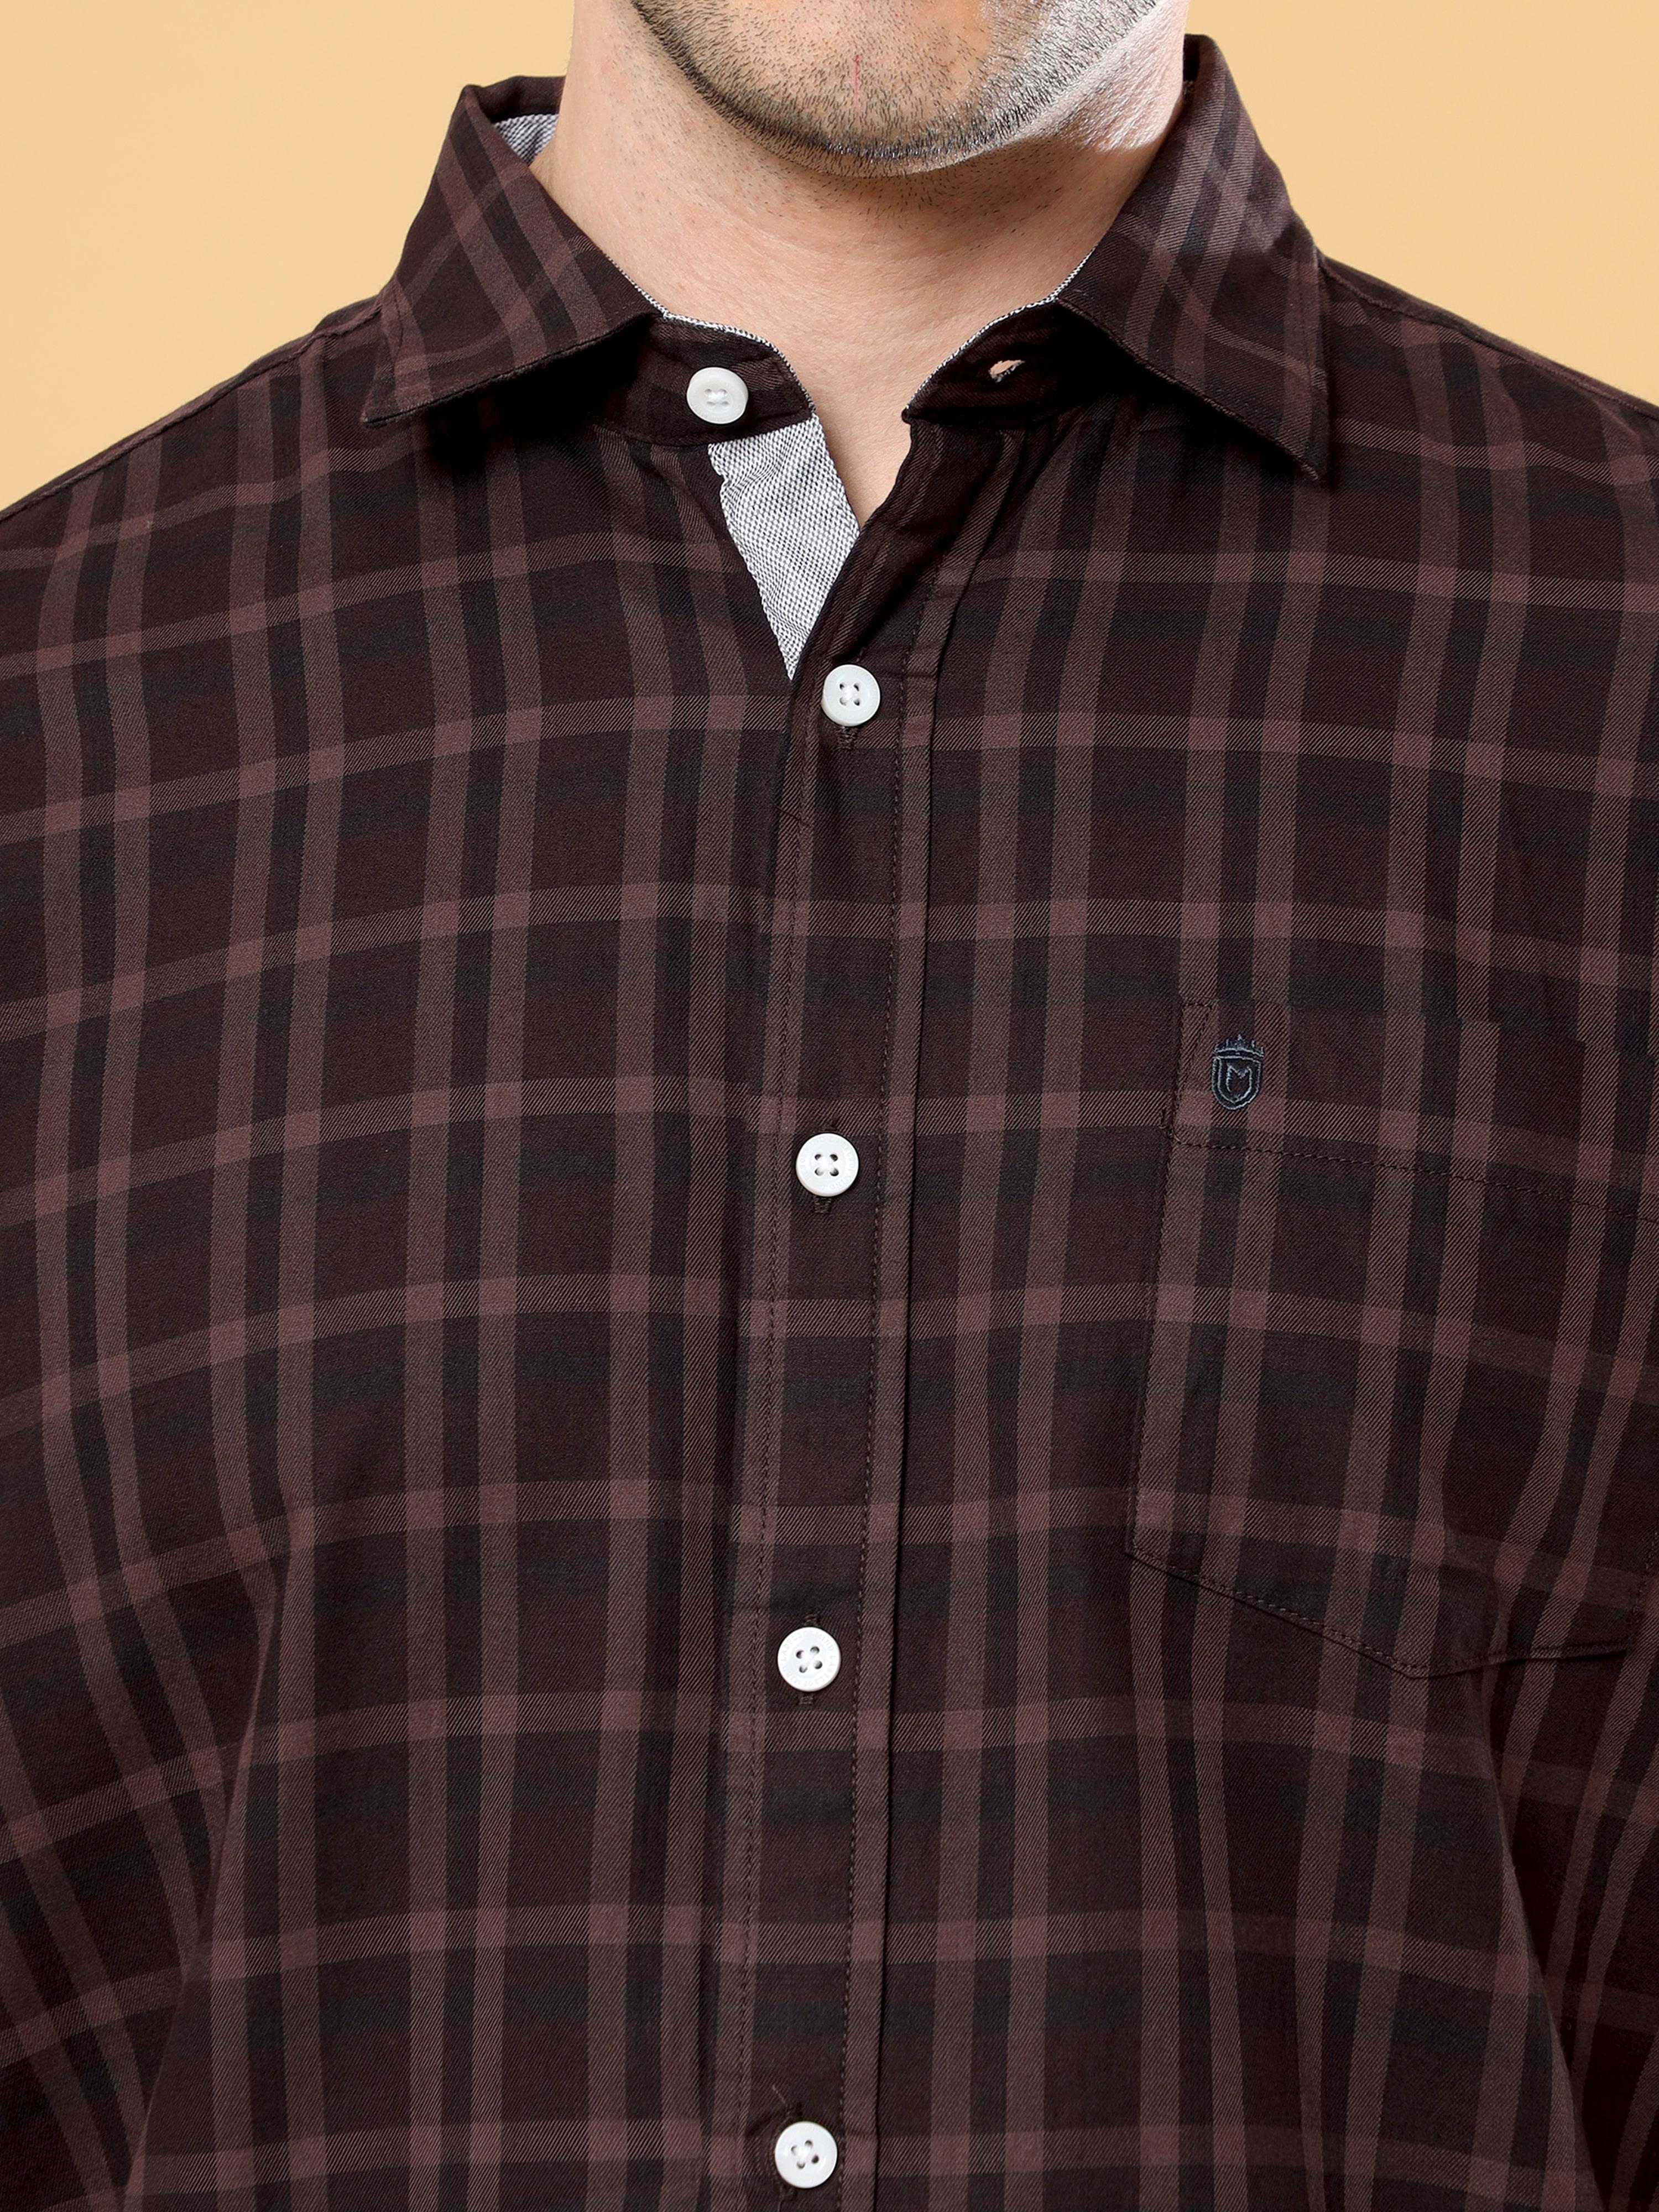 Shop Trendy Brown Check Shirt Online at Great PriceRs. 899.00